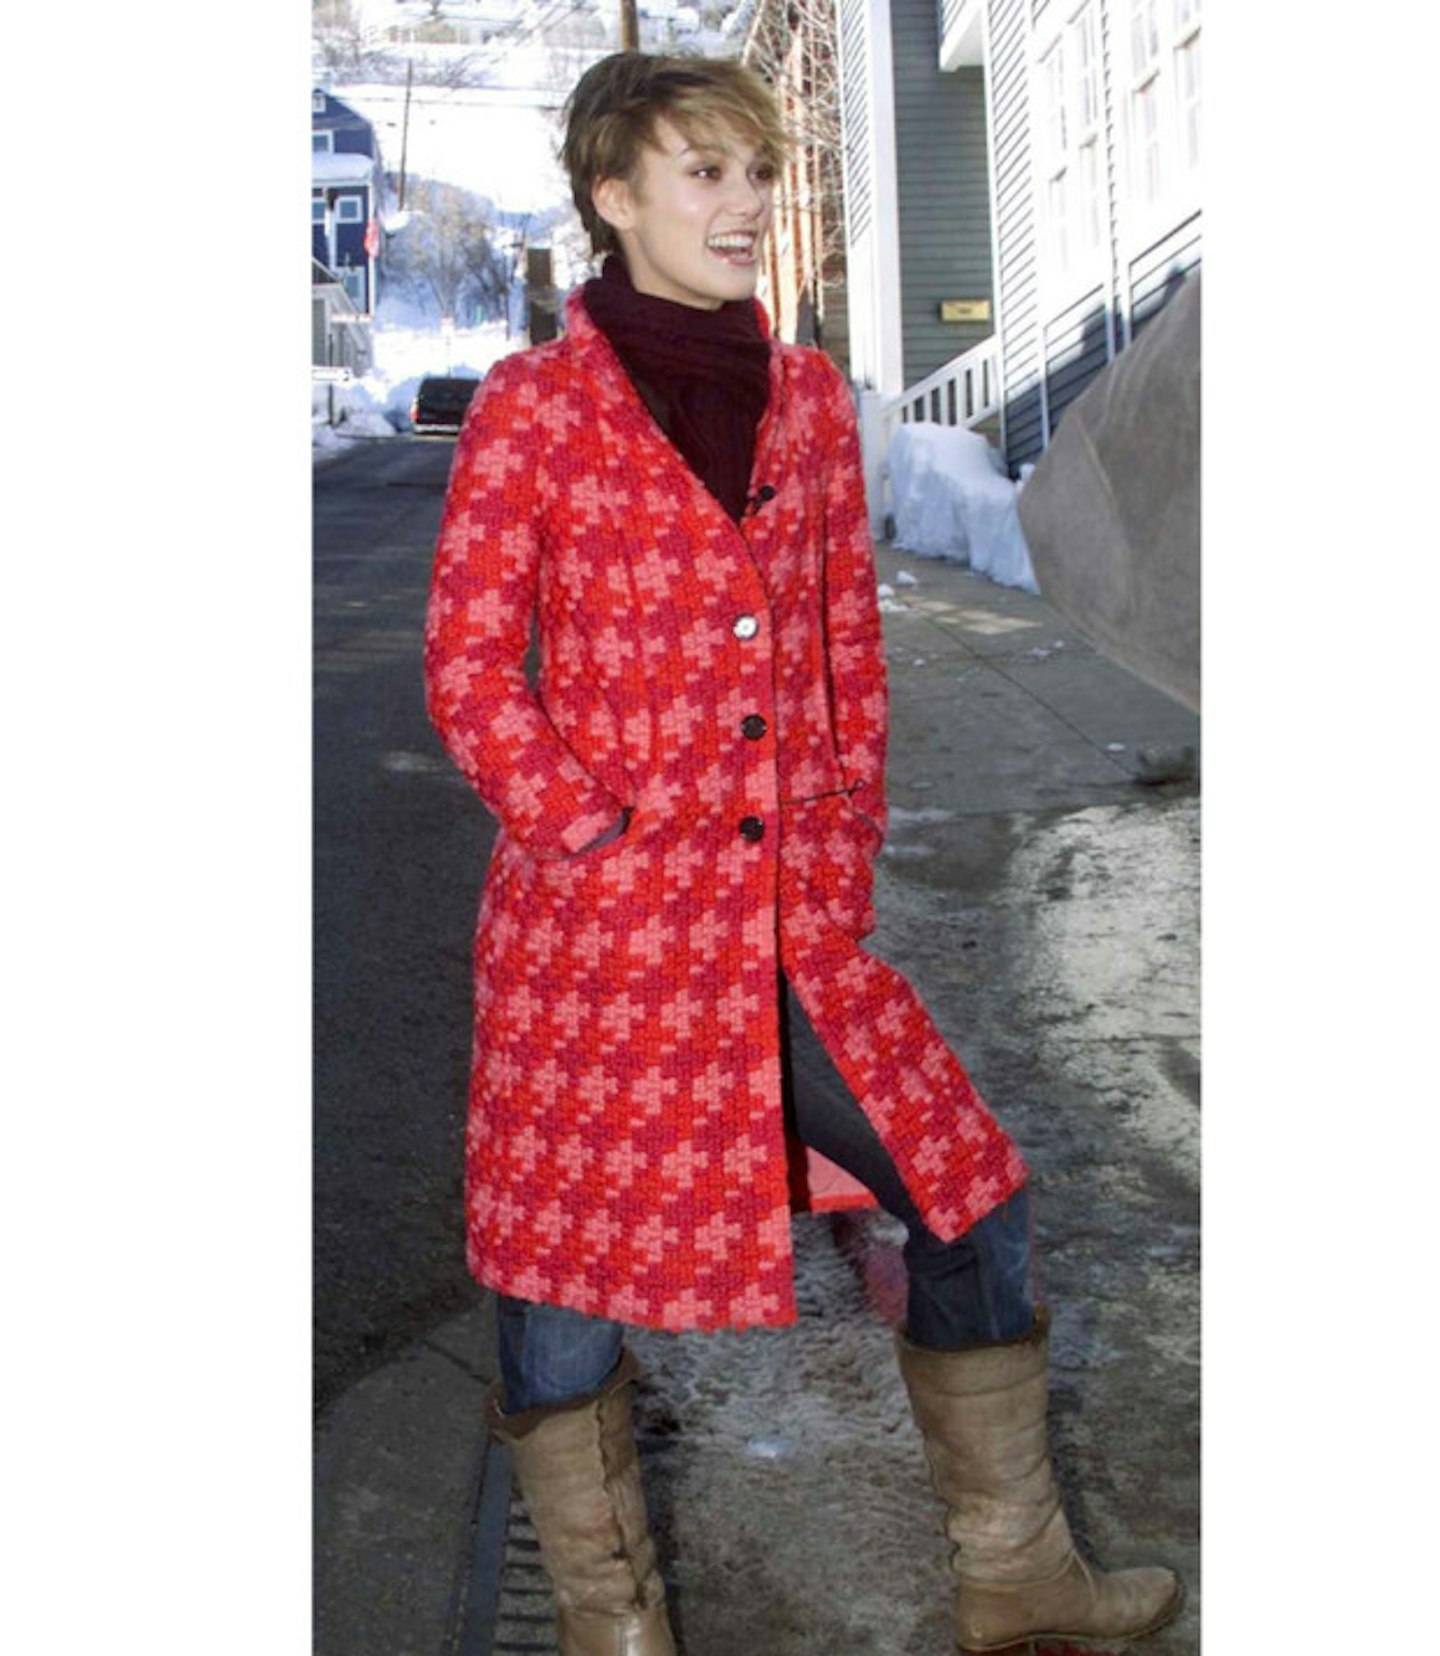 keira-knightley-before-stylist-red-coat